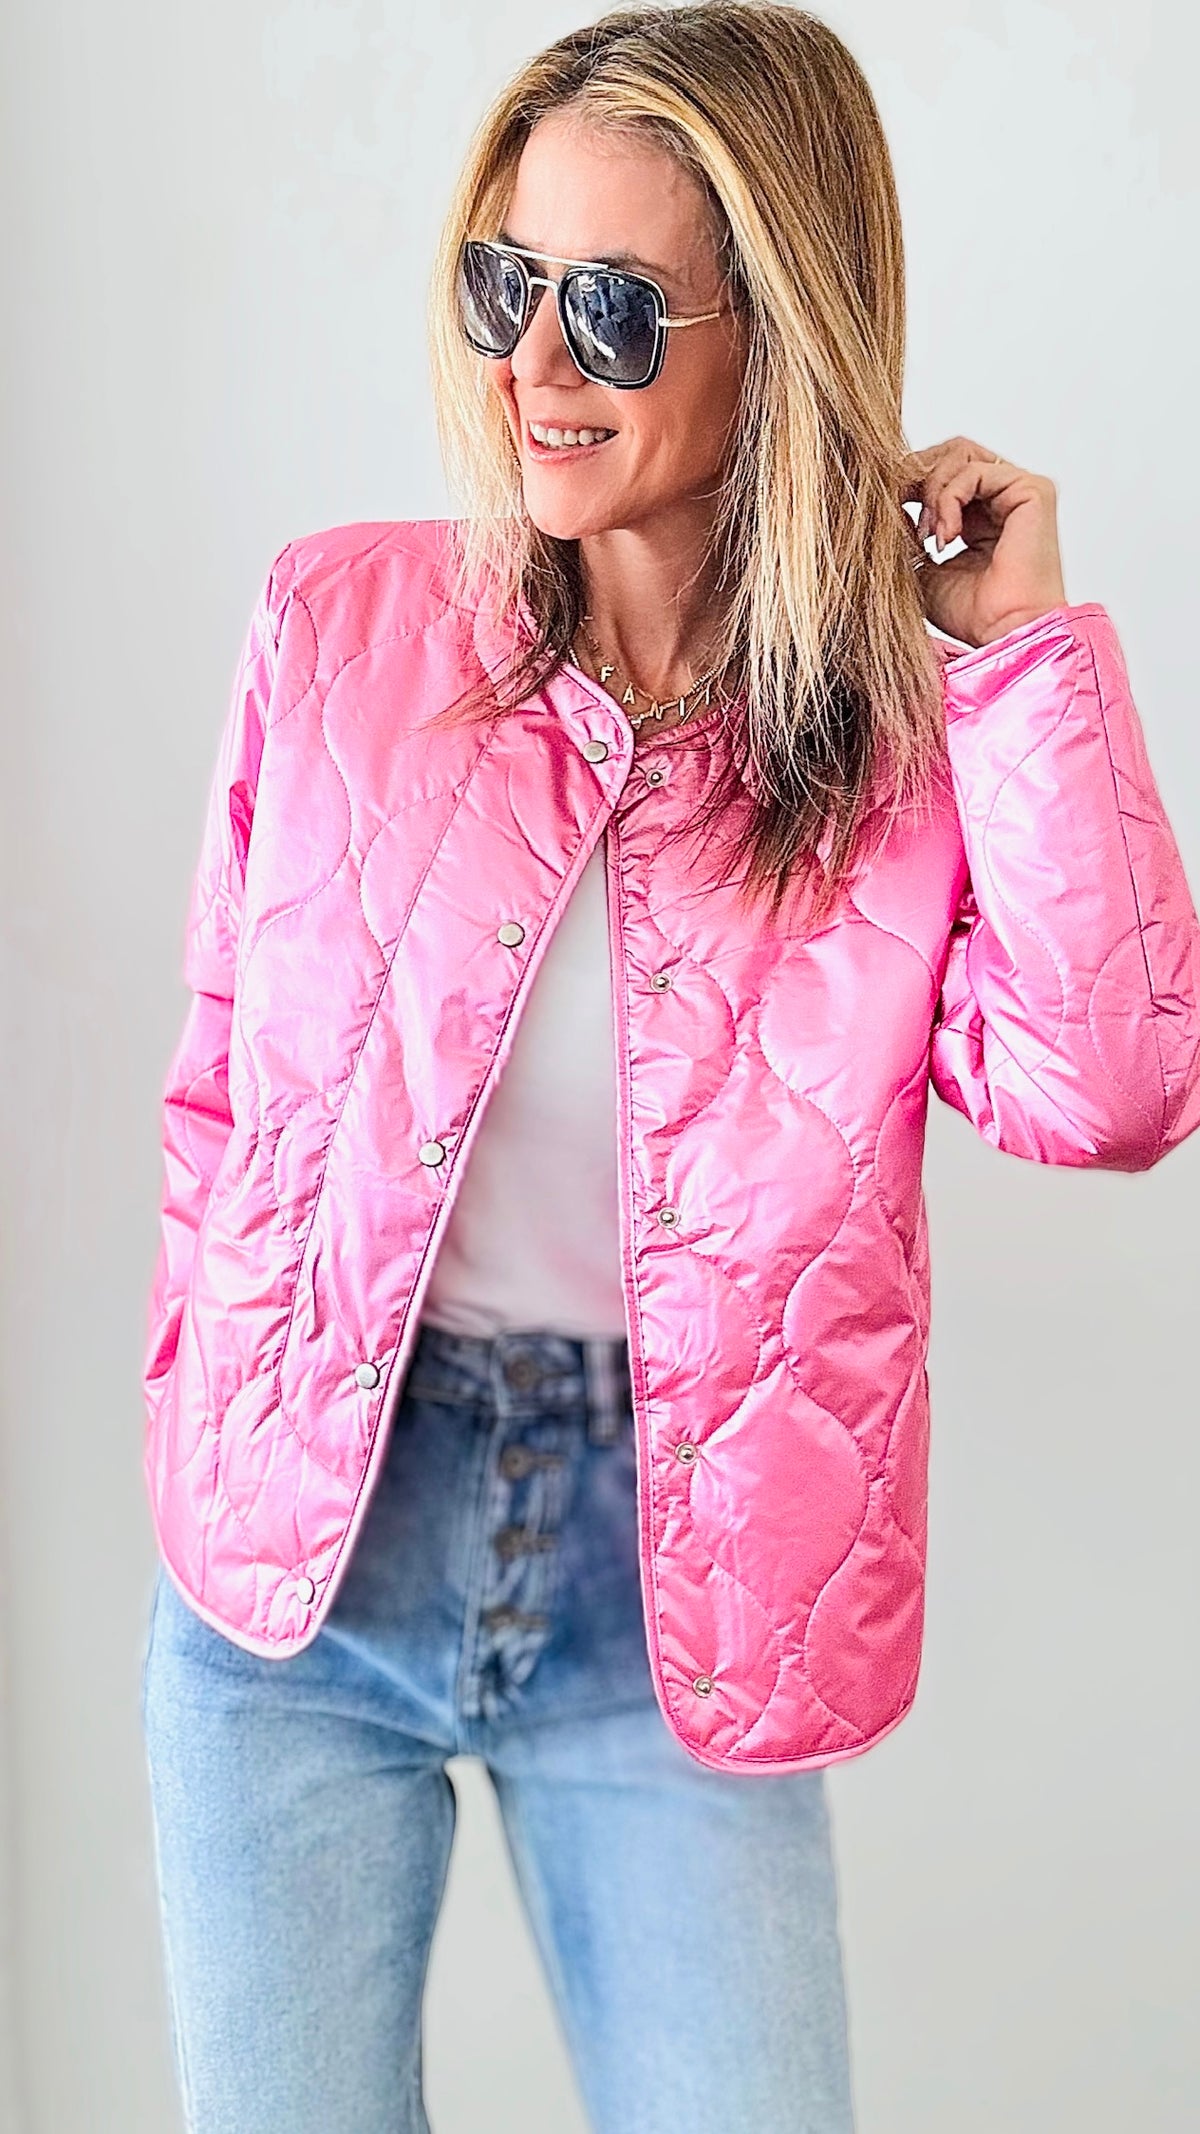 Metallic Fashion Nova Jacket - Pink-160 Jackets-TCEC-Coastal Bloom Boutique, find the trendiest versions of the popular styles and looks Located in Indialantic, FL